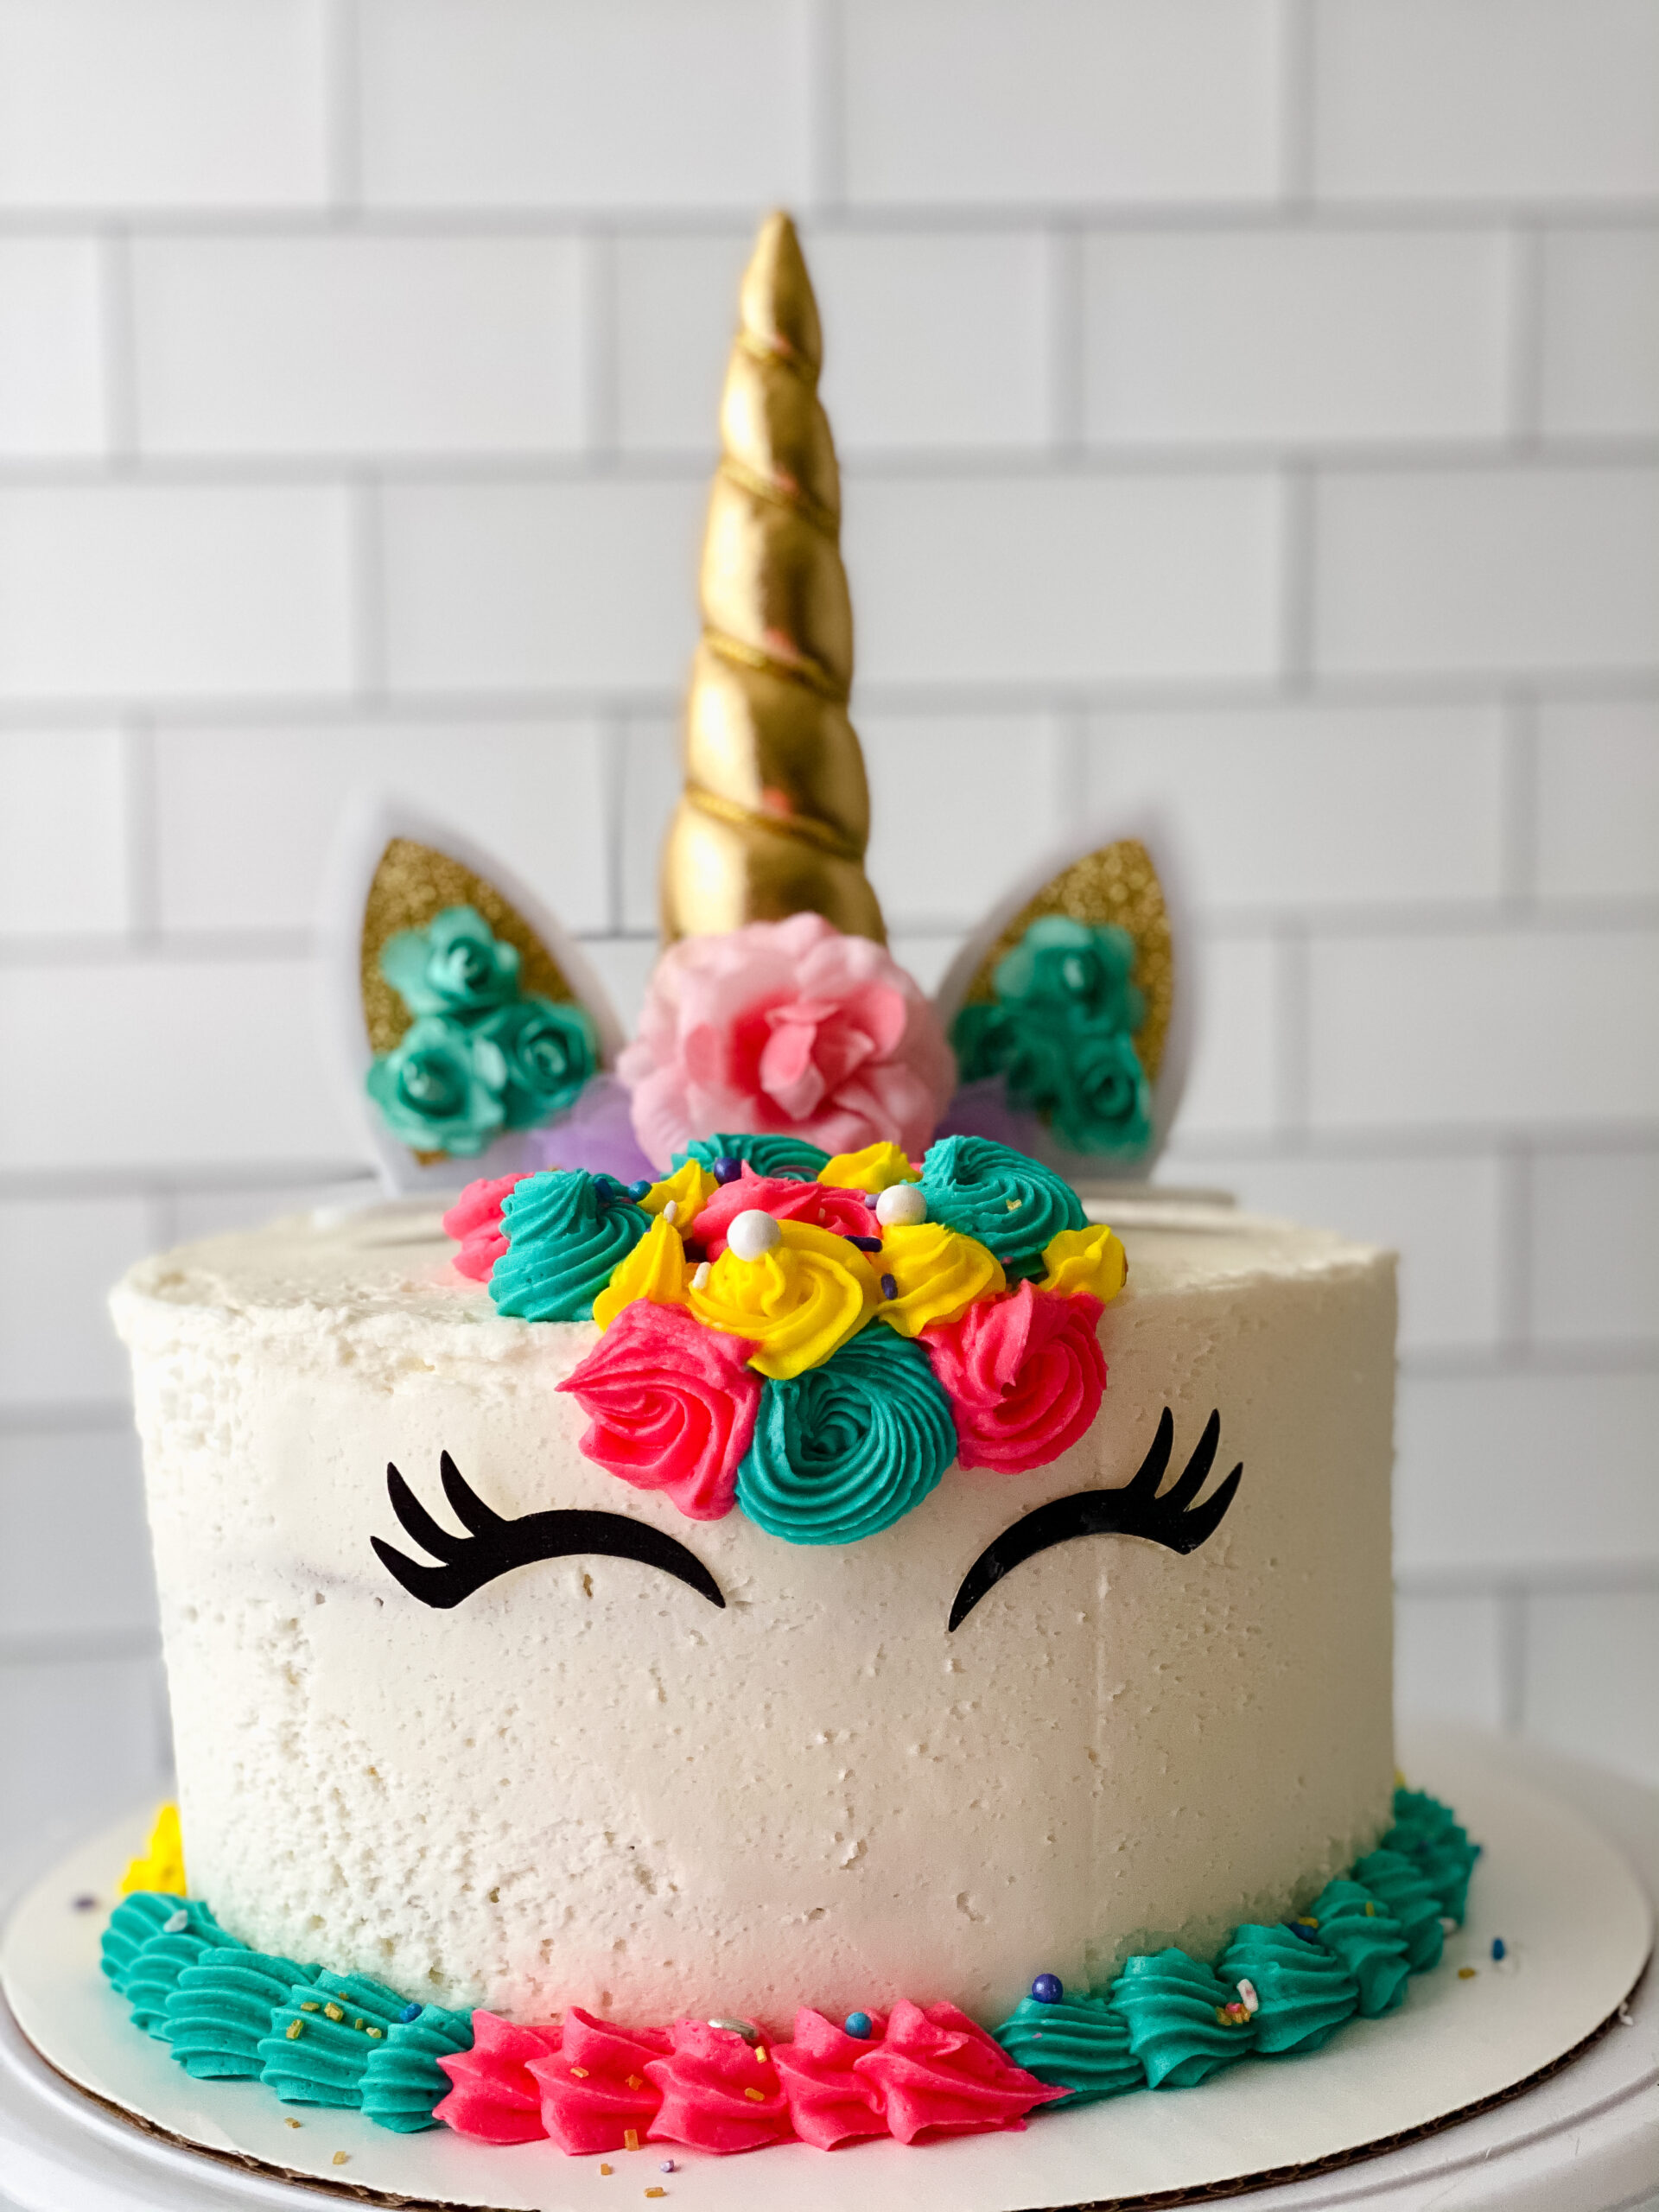 Easy Unicorn Cake | How to Decorate Cake using Whipped Cream Frosting -  YouTube